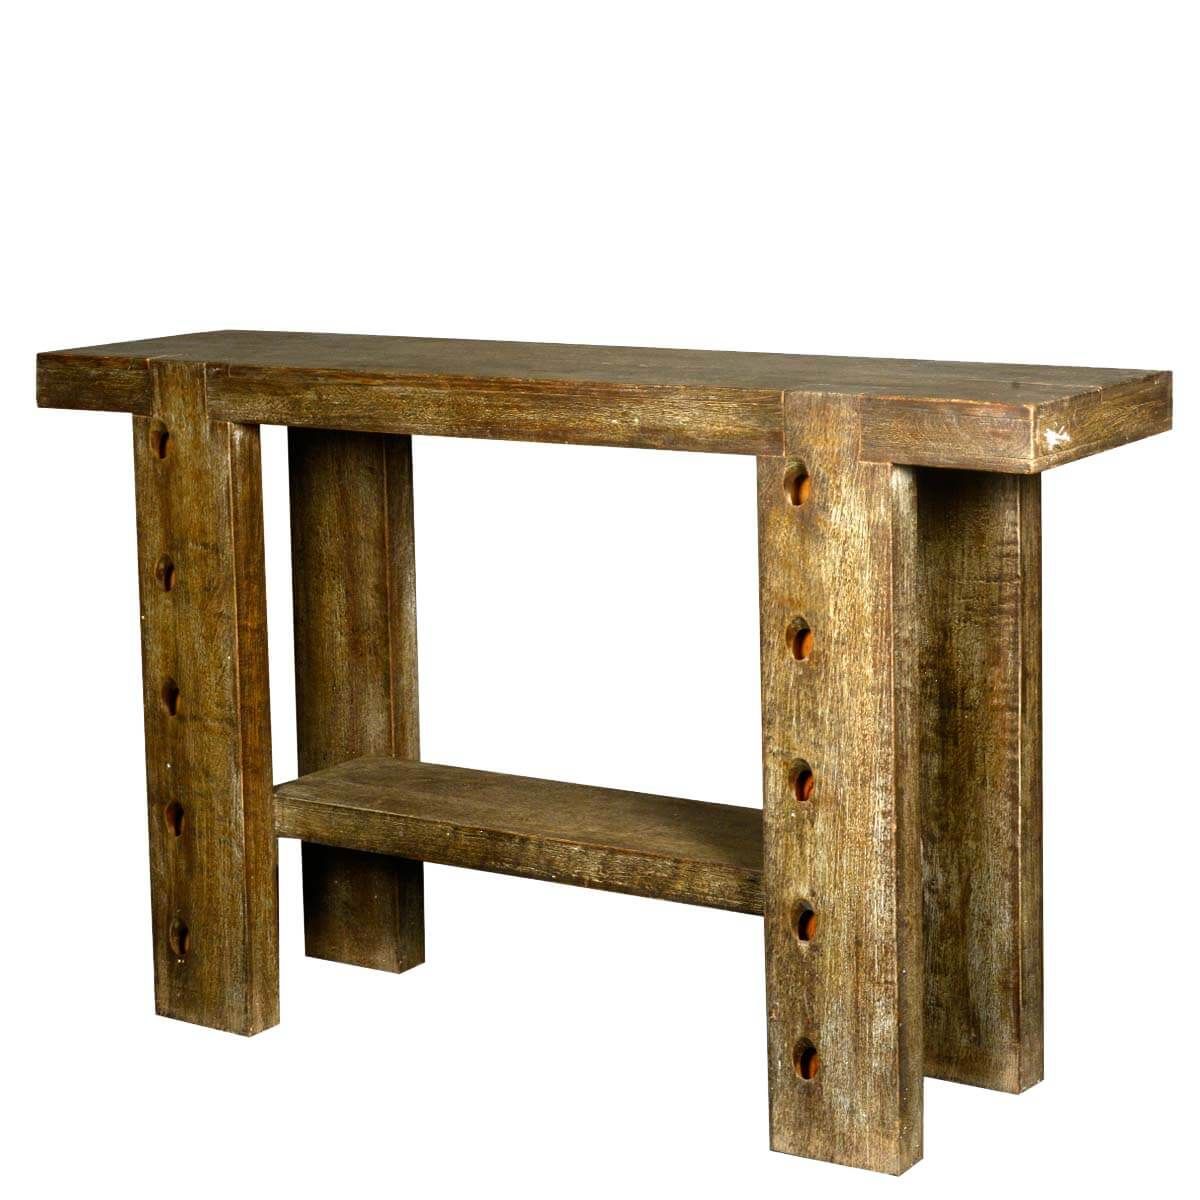 Rustic 10 Holes Reclaimed Wood Sofa Table Hall Console Regarding Barnwood Console Tables (View 16 of 20)